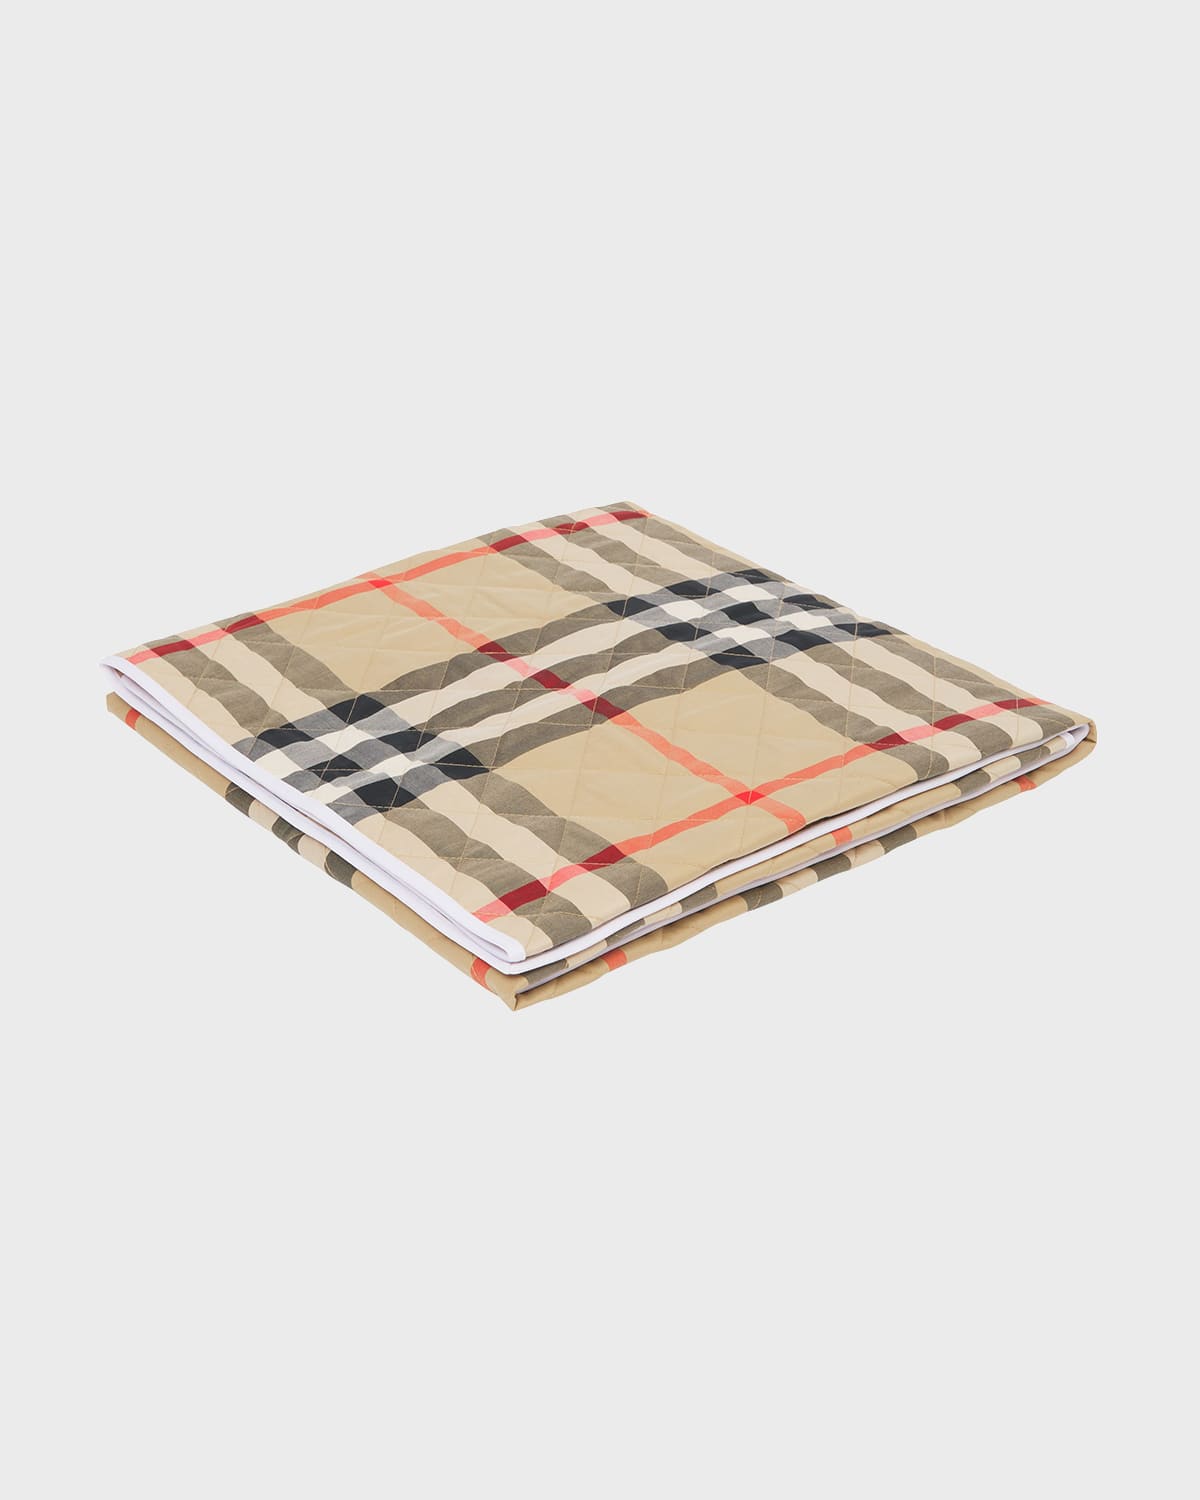 BURBERRY KID'S TERI DIAMOND-QUILTED CHECK BLANKET